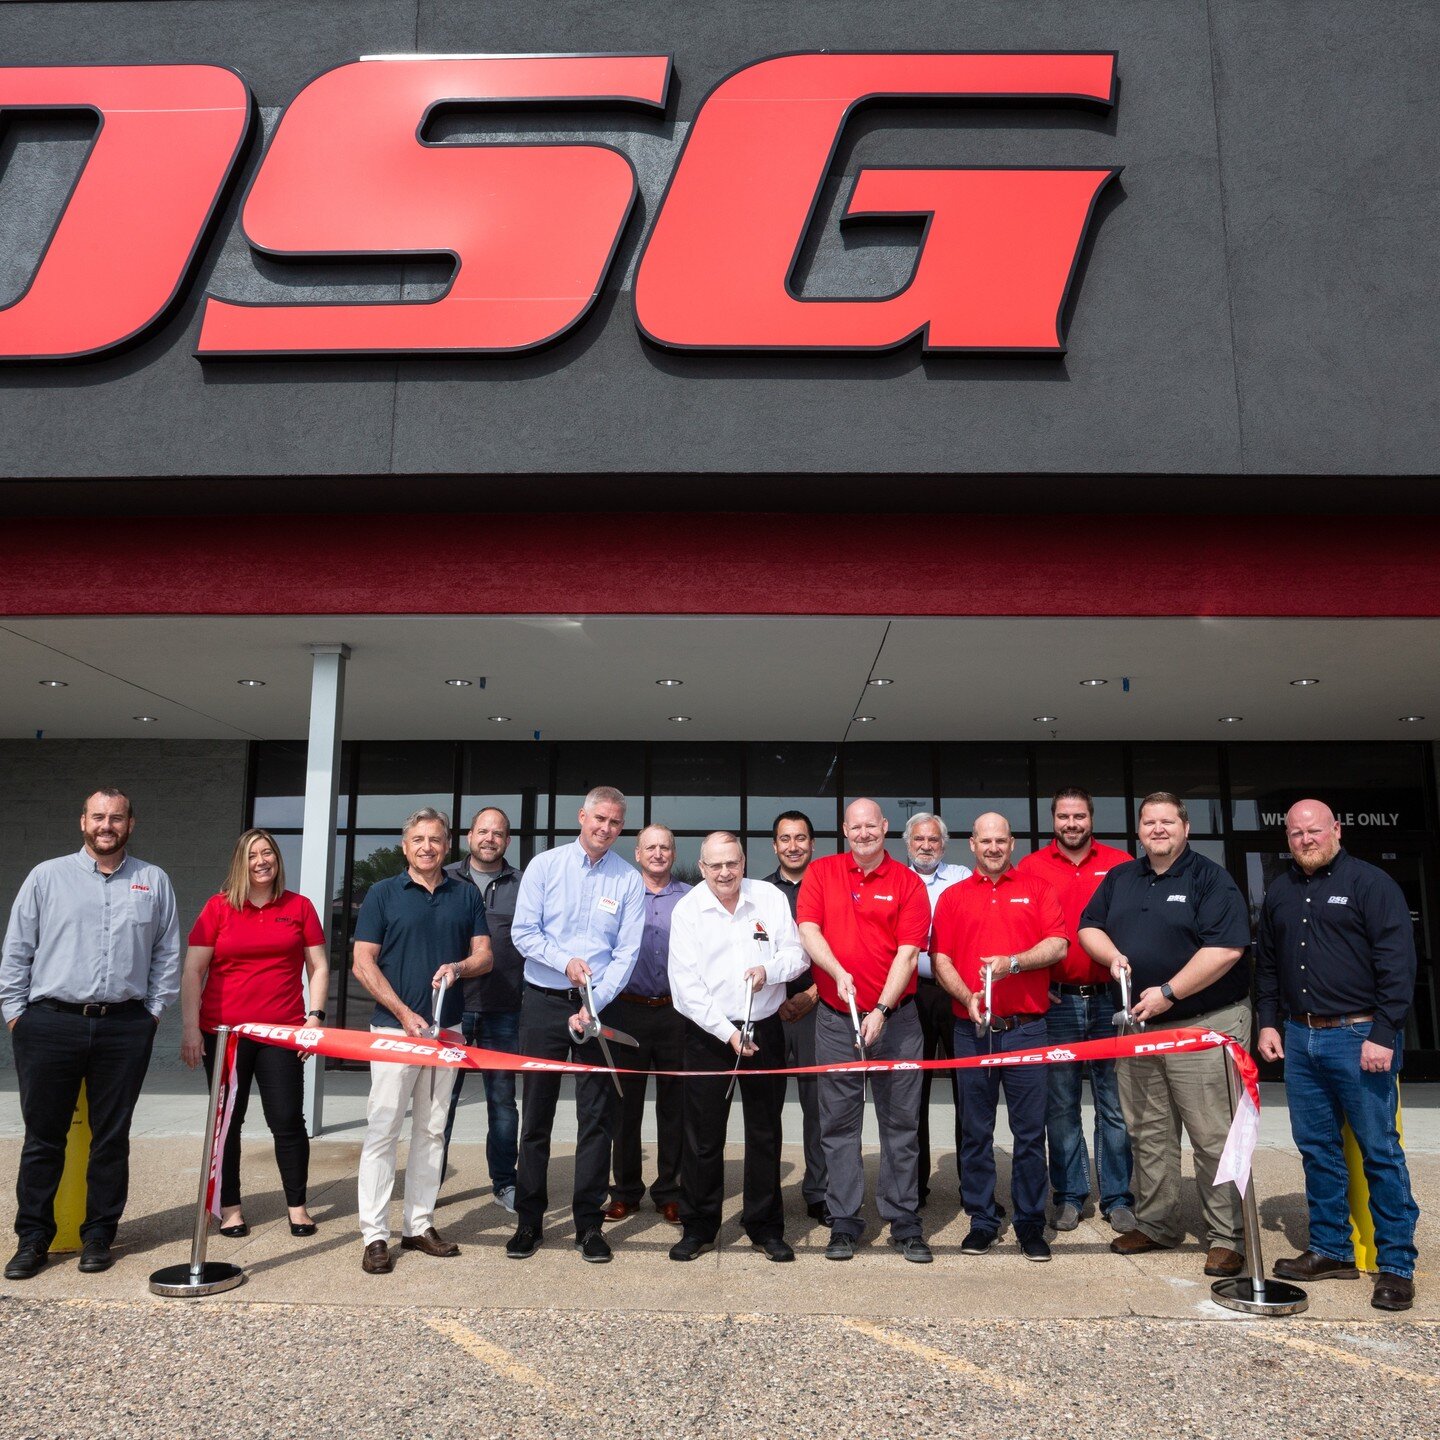 This week was the ribbon cutting for the new Dakota Supply Group (DSG) location in South Sioux City. PC Construction worked with Perkins Properties and DSG on this design/build project converting a former Walmart store into their new sales and wareho